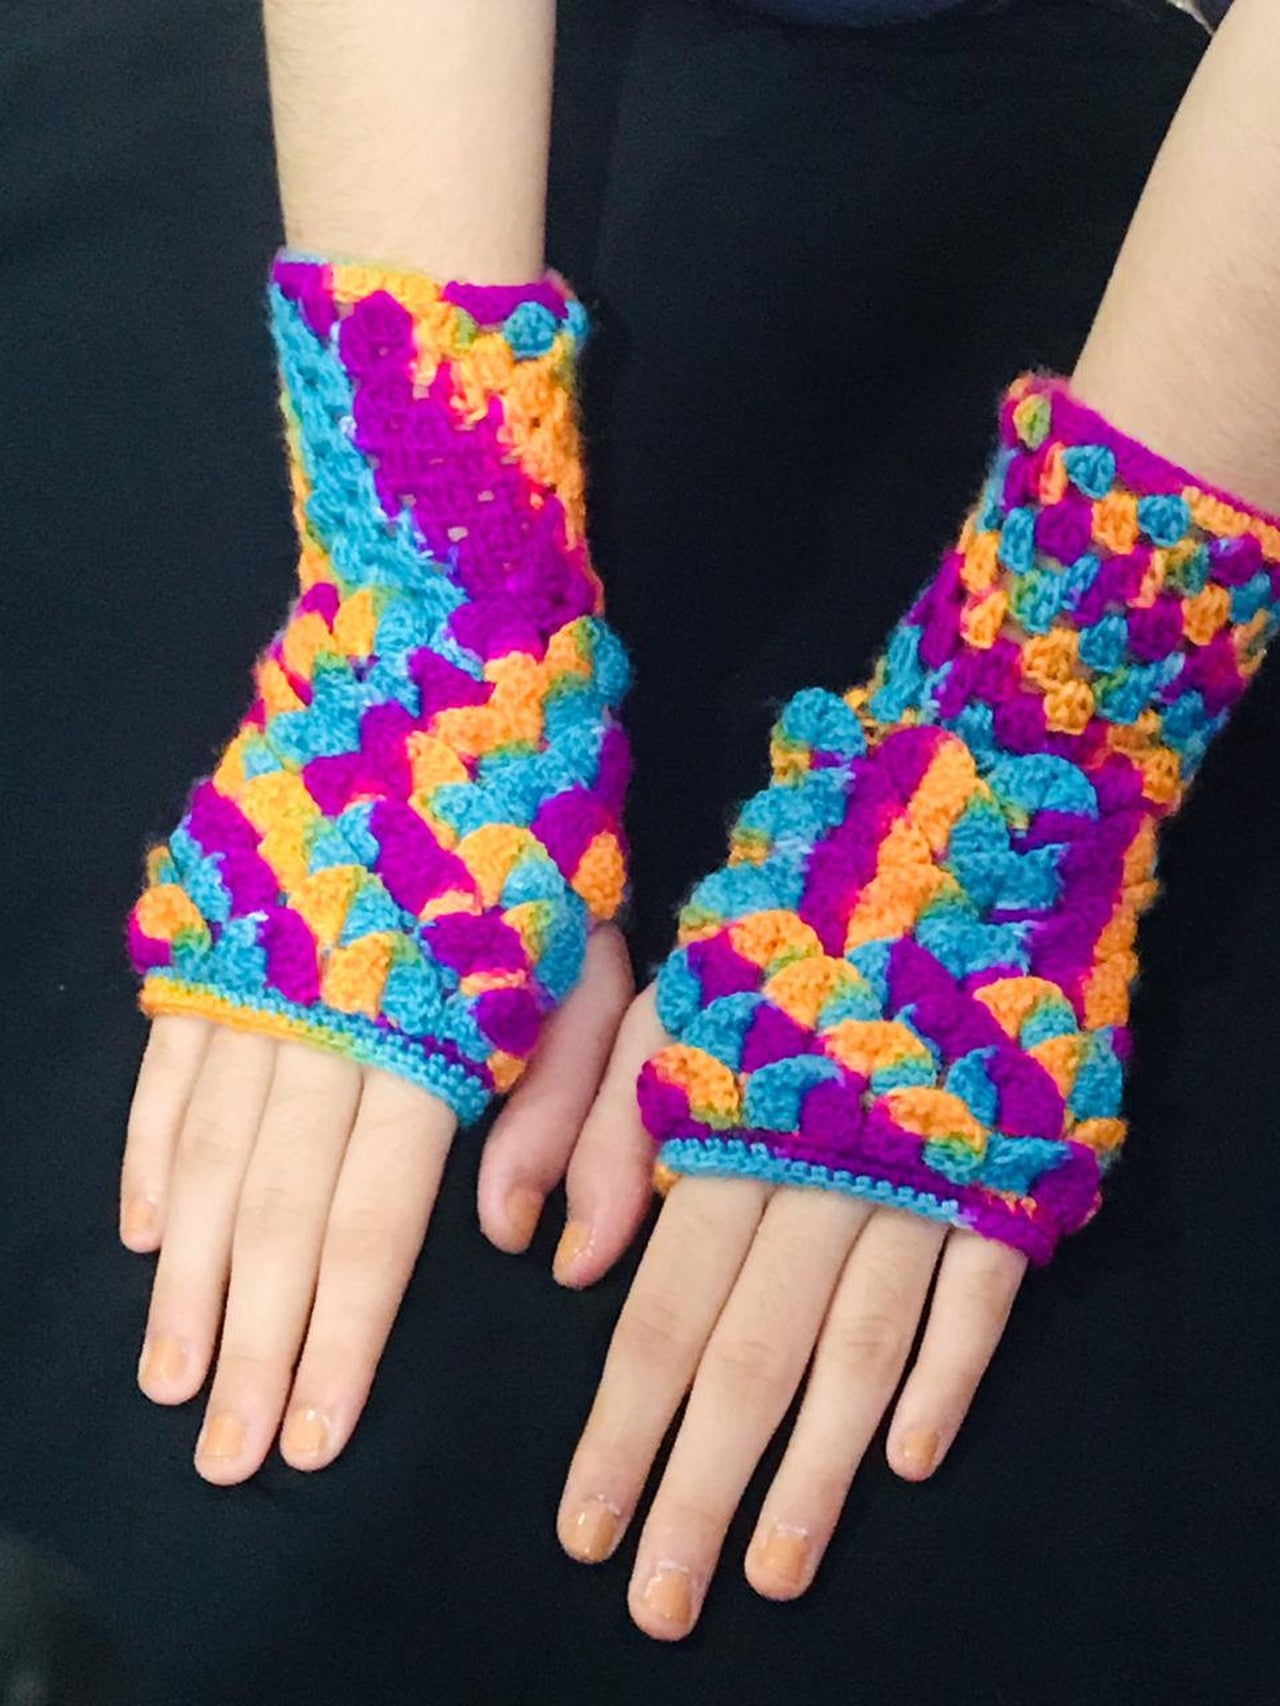 Pure Handmade knitted / Crochet Gauntlets Lady Fashion Fingerless Gloves / Mitten Multi Colour